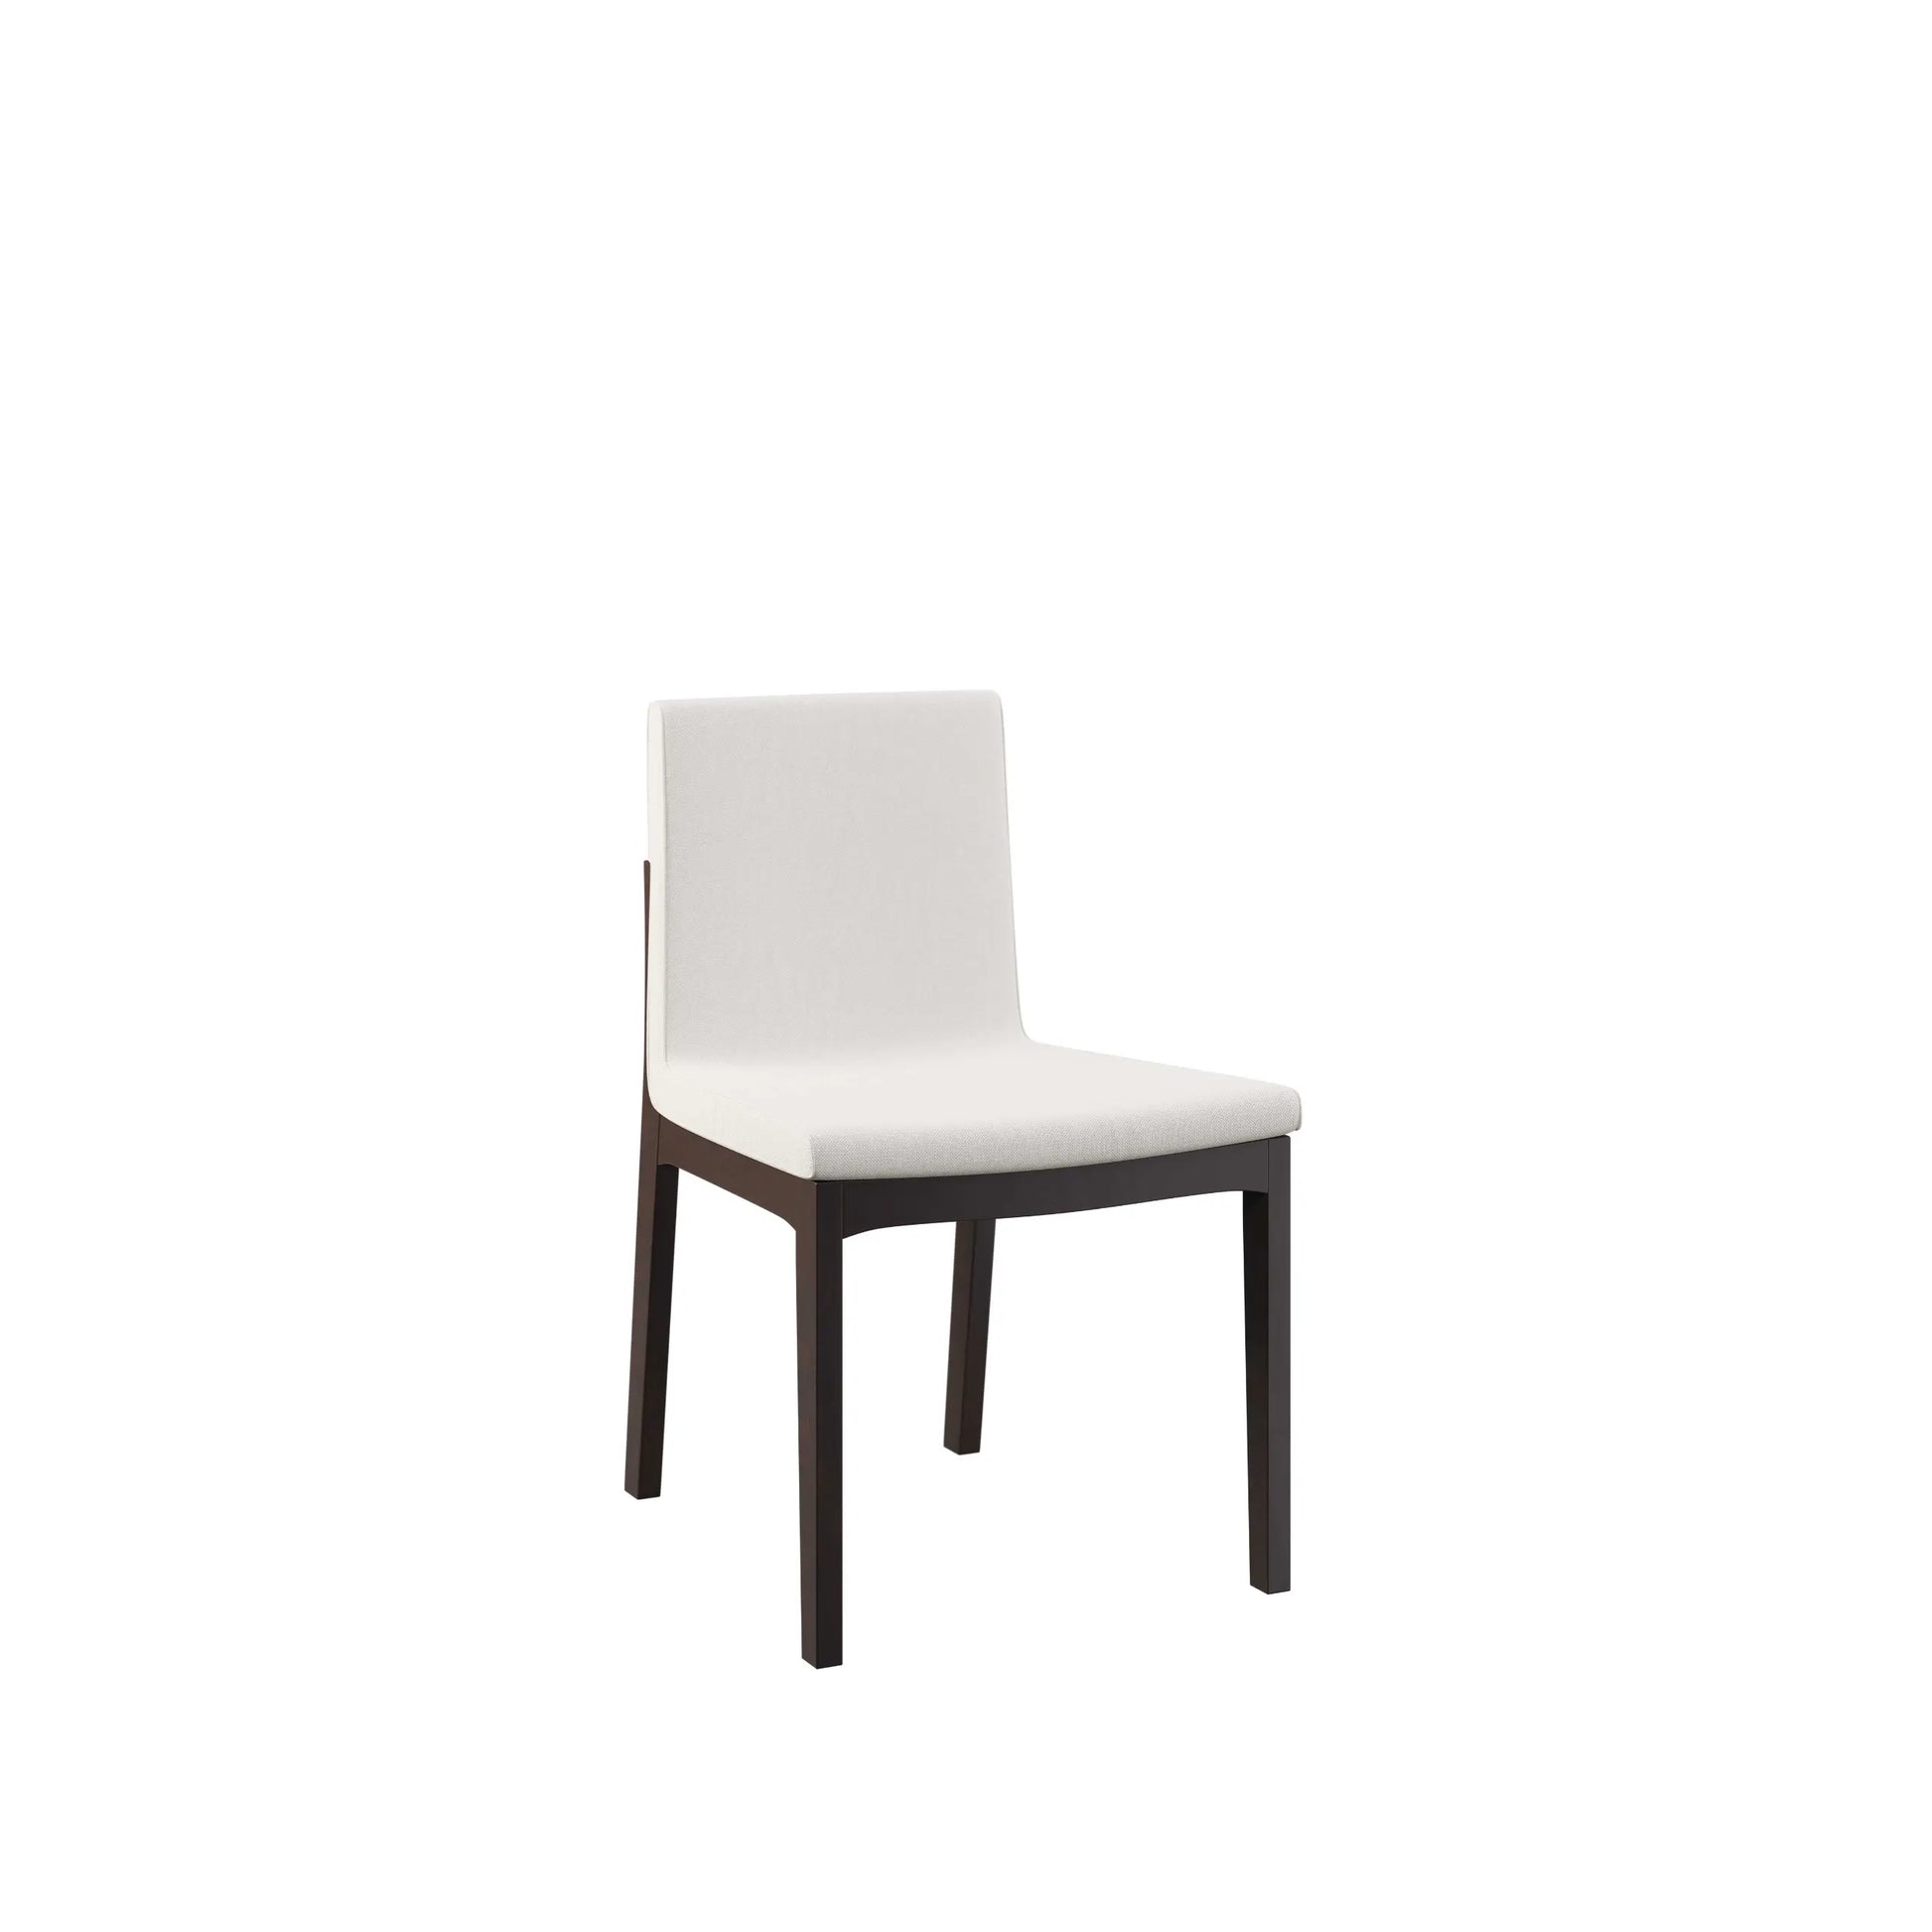 The Capri - Modern Dining Chair or Bench Moderncre8ve